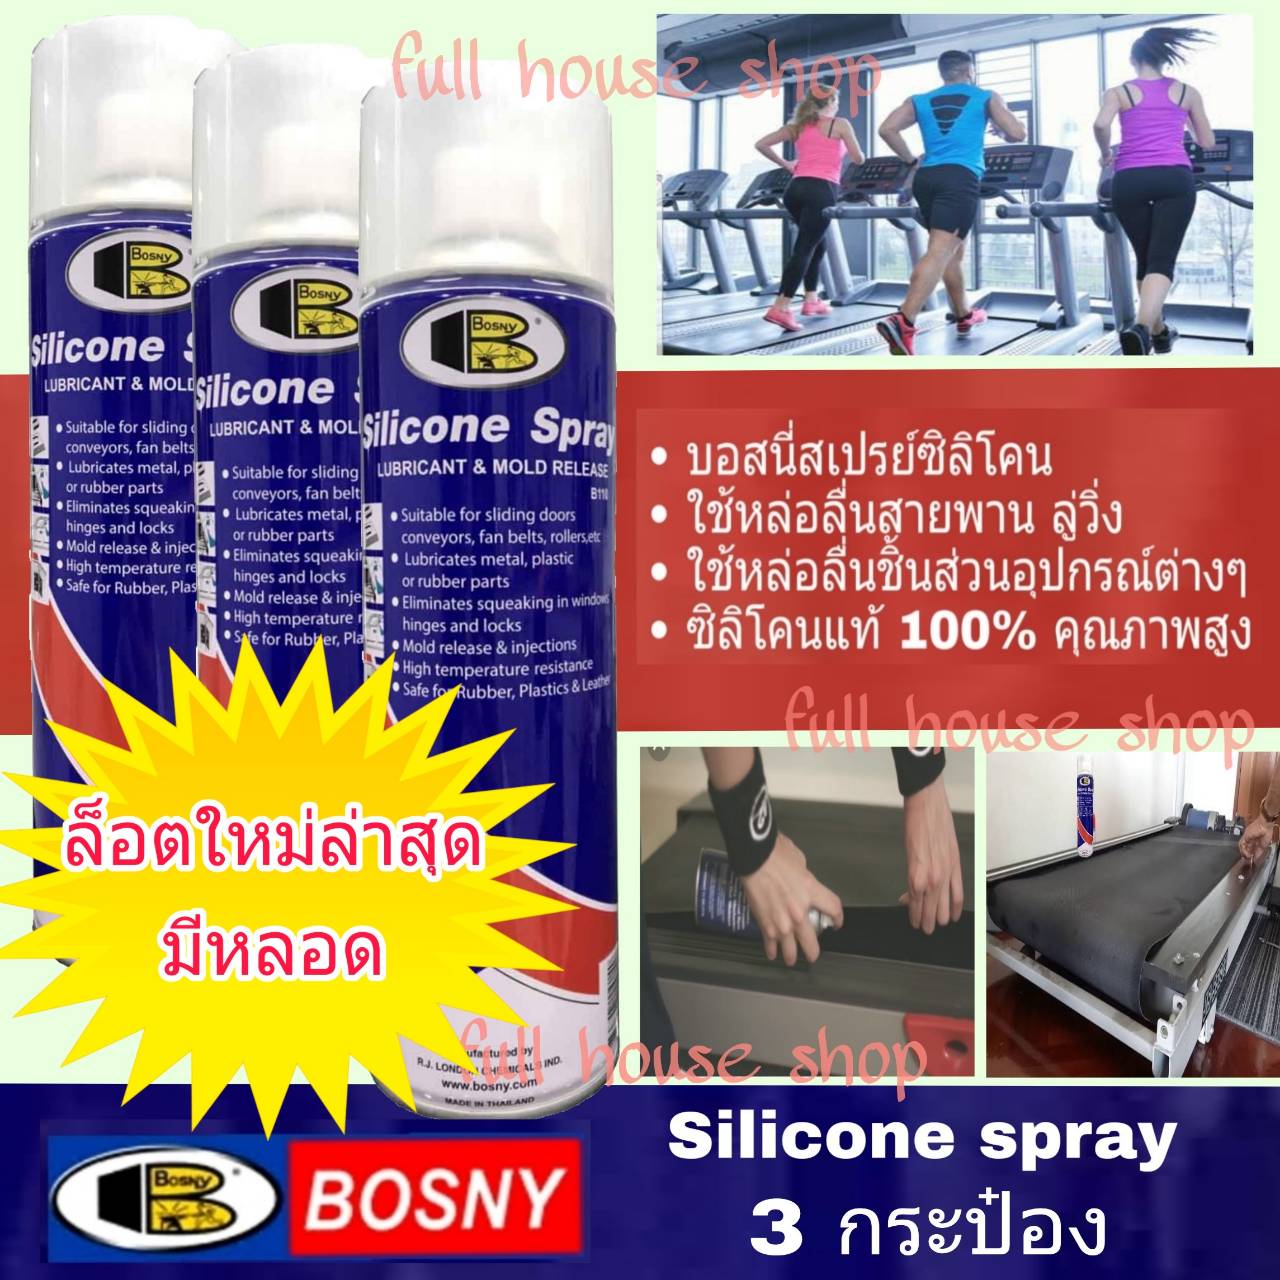 BOSNY TREADMILL BELT LUBRICANT. 500 ml. 3 cans. Silicone spray for lubrication.